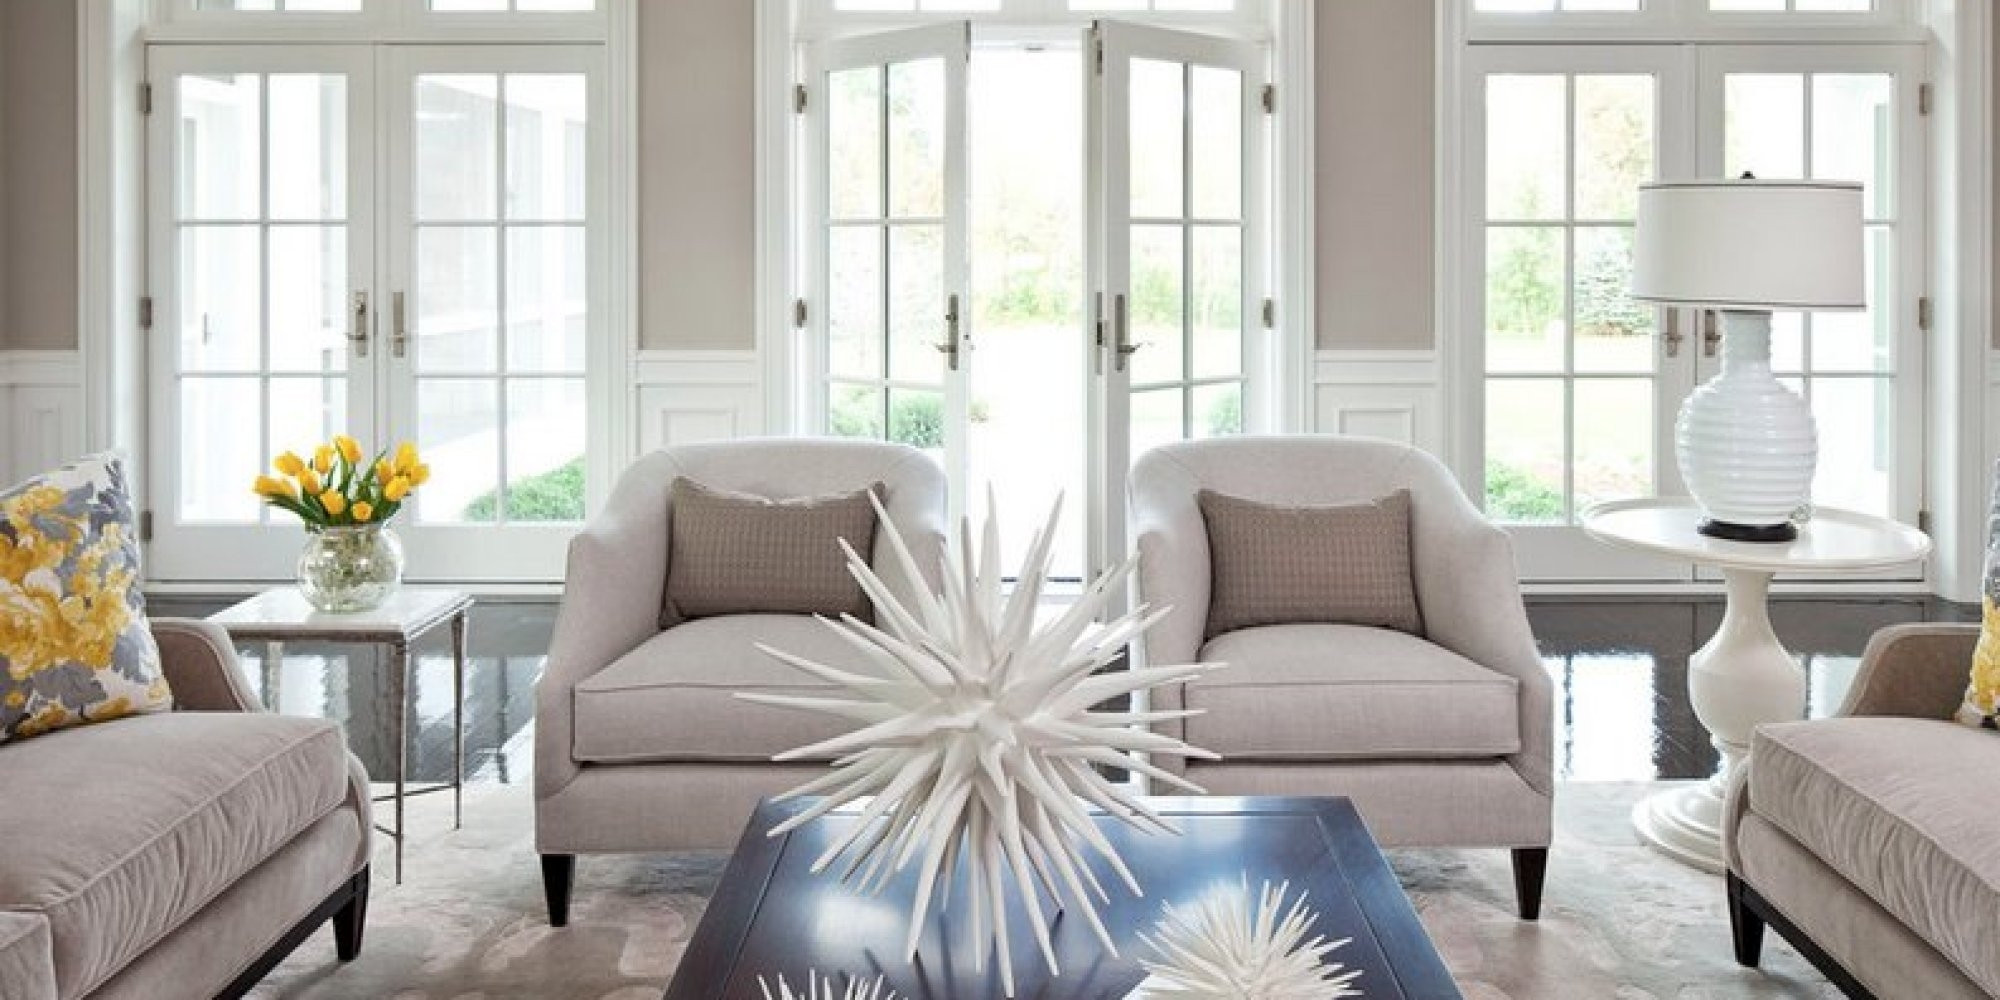 Neutral Color For Living Room
 Best Warm Neutral Paint Colors For Living Room — Randolph